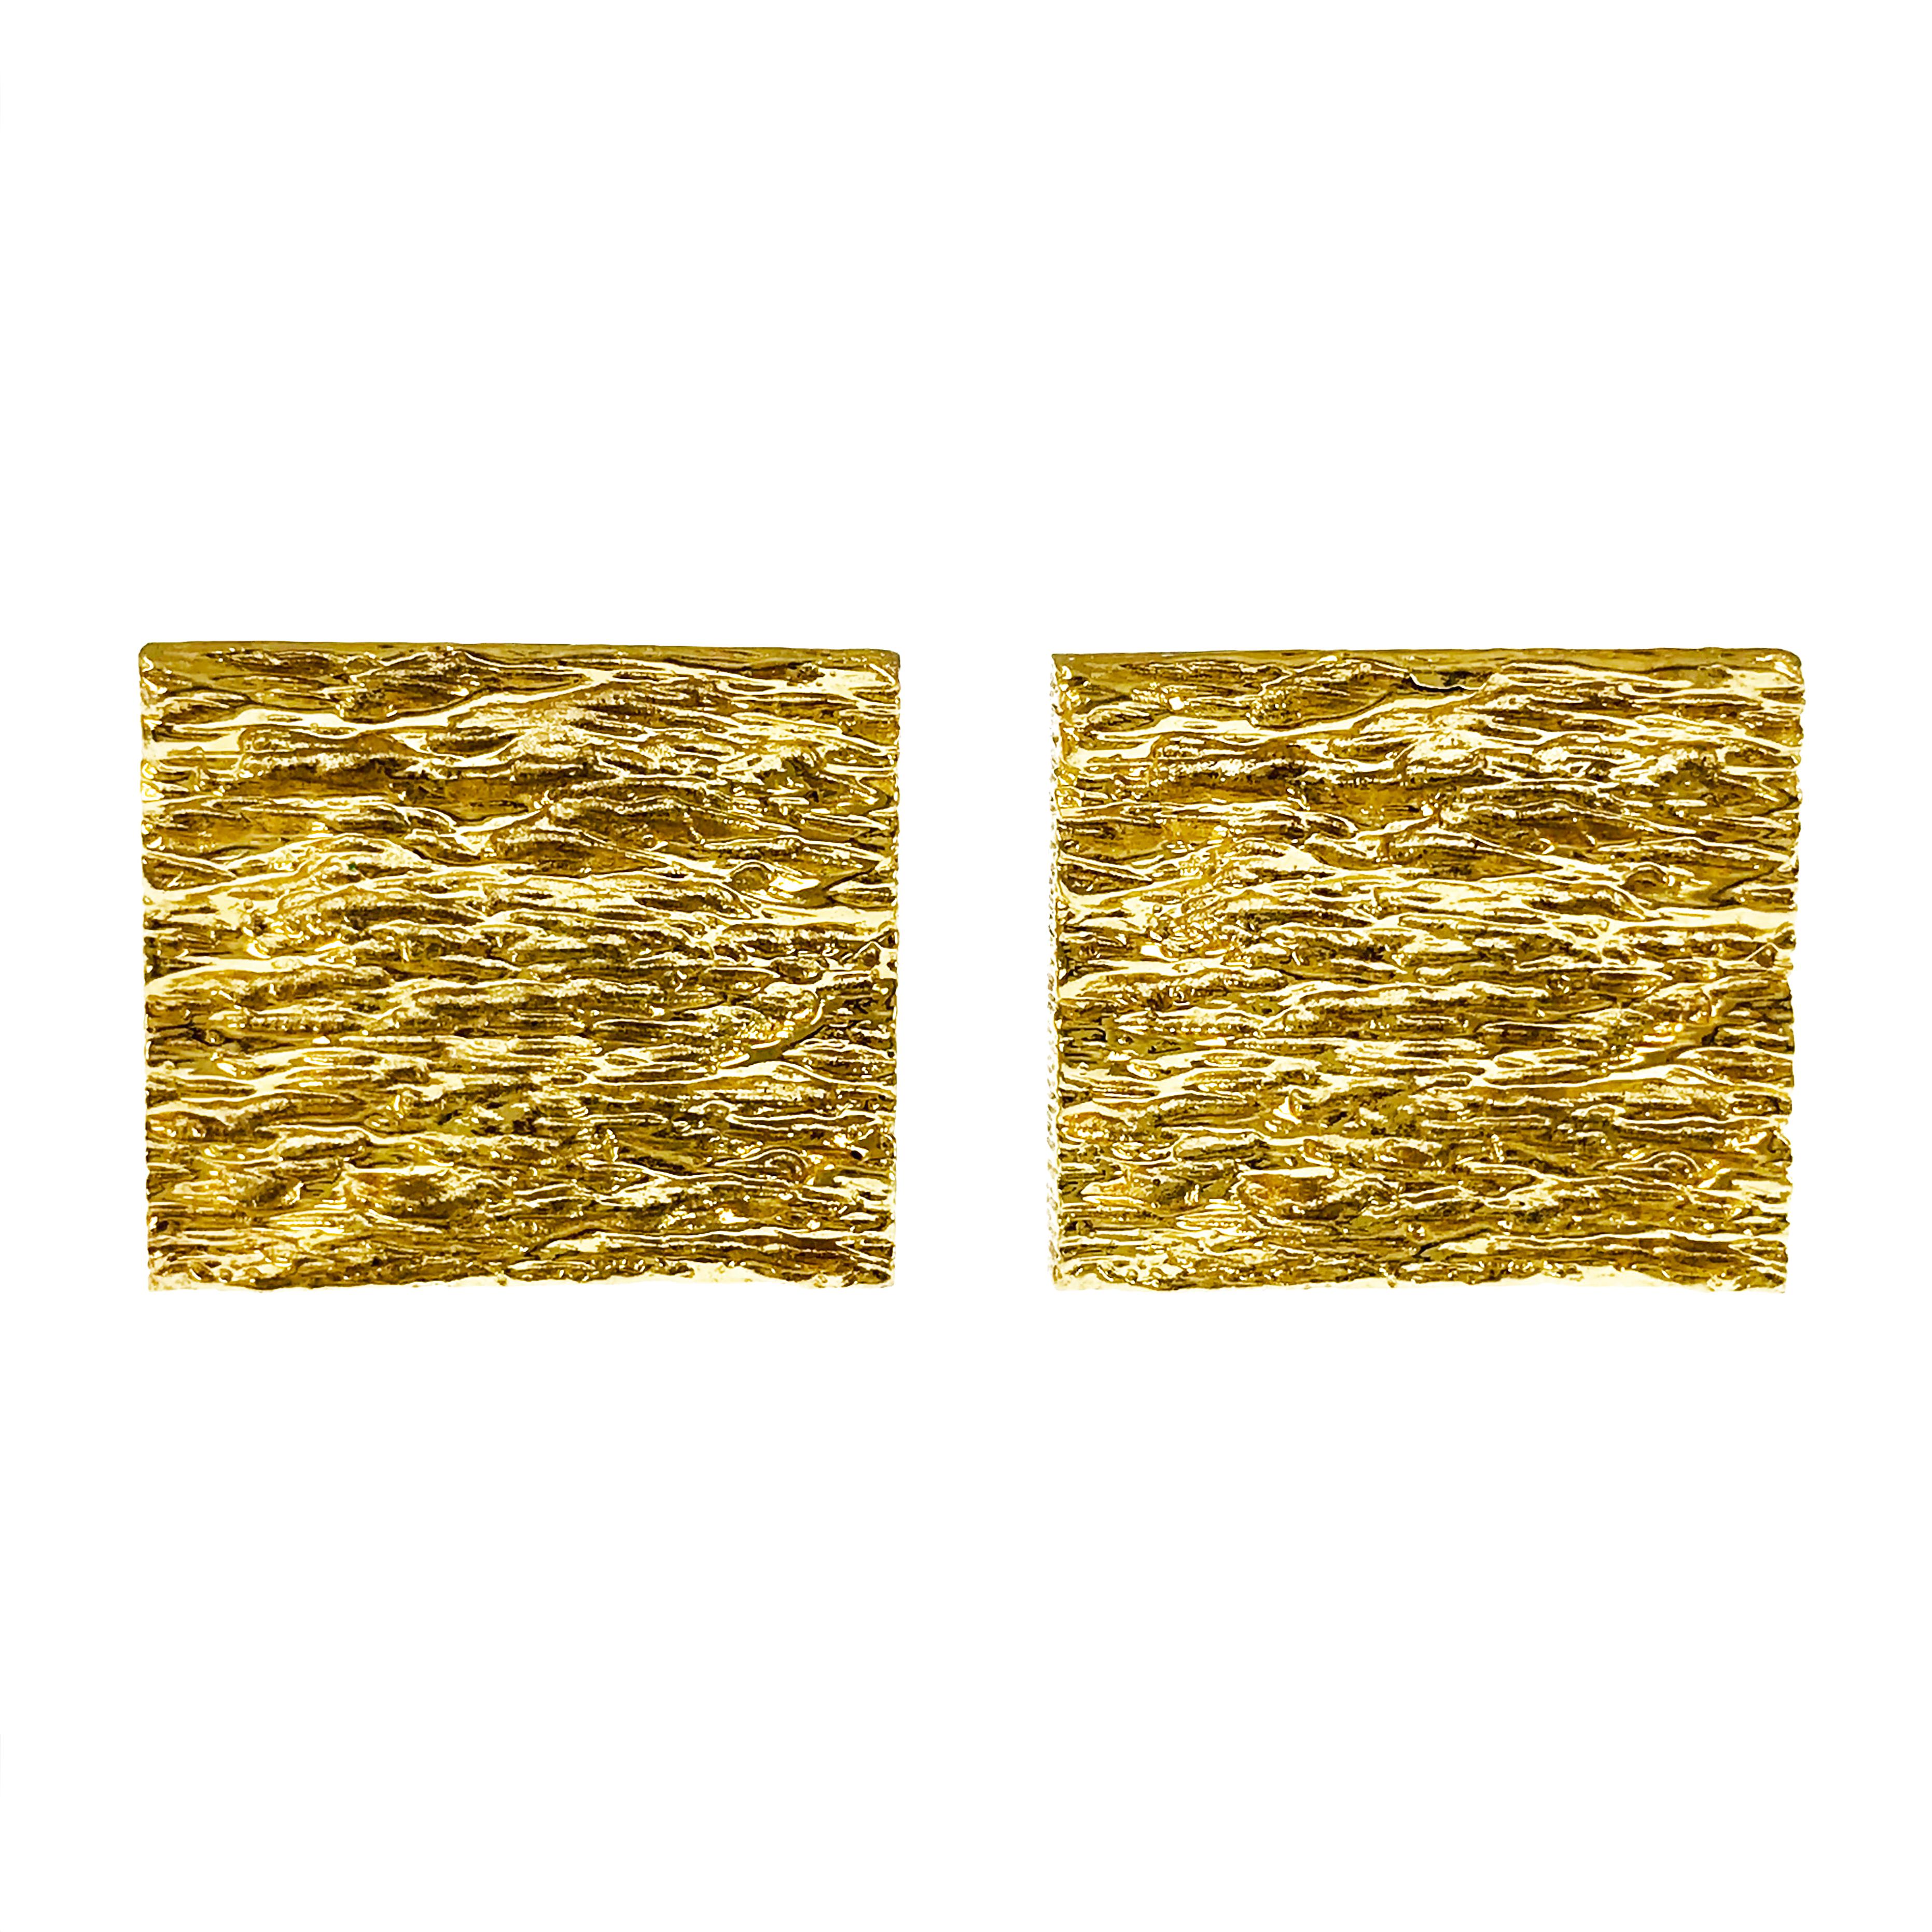 Rectangular 14k Yellow Gold Cufflinks. These highly textured bark finish cufflinks have a dual post and bullet backing. There is a slight concave to the fronts of the cufflinks. The cufflink fronts measure approximately 21.8mm by 18.9mm.

NOTE: 